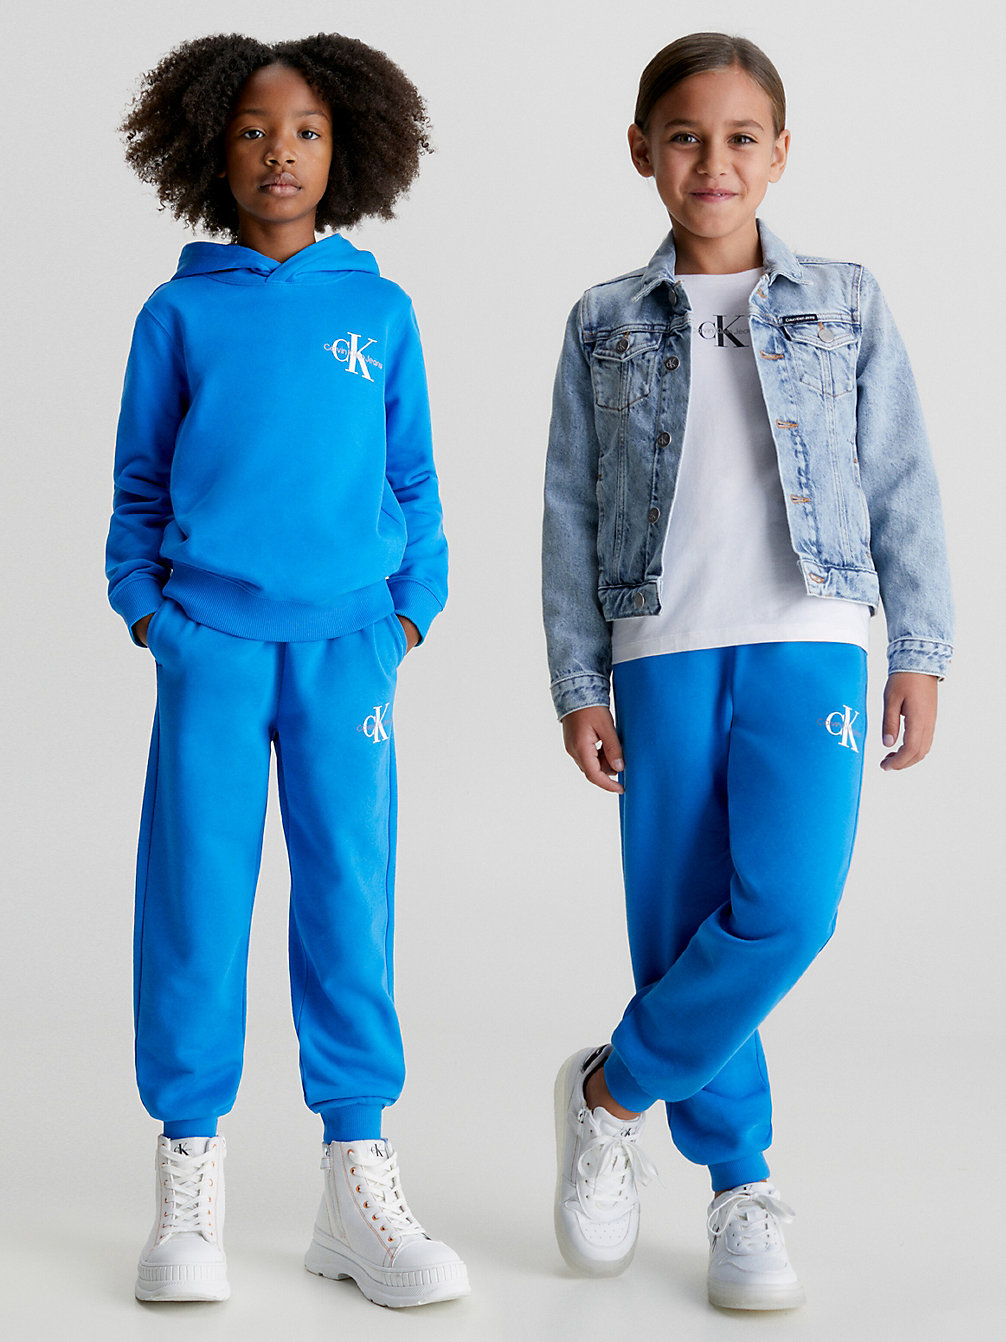 CORRIB RIVER BLUE Kids Relaxed Joggers undefined kids unisex Calvin Klein